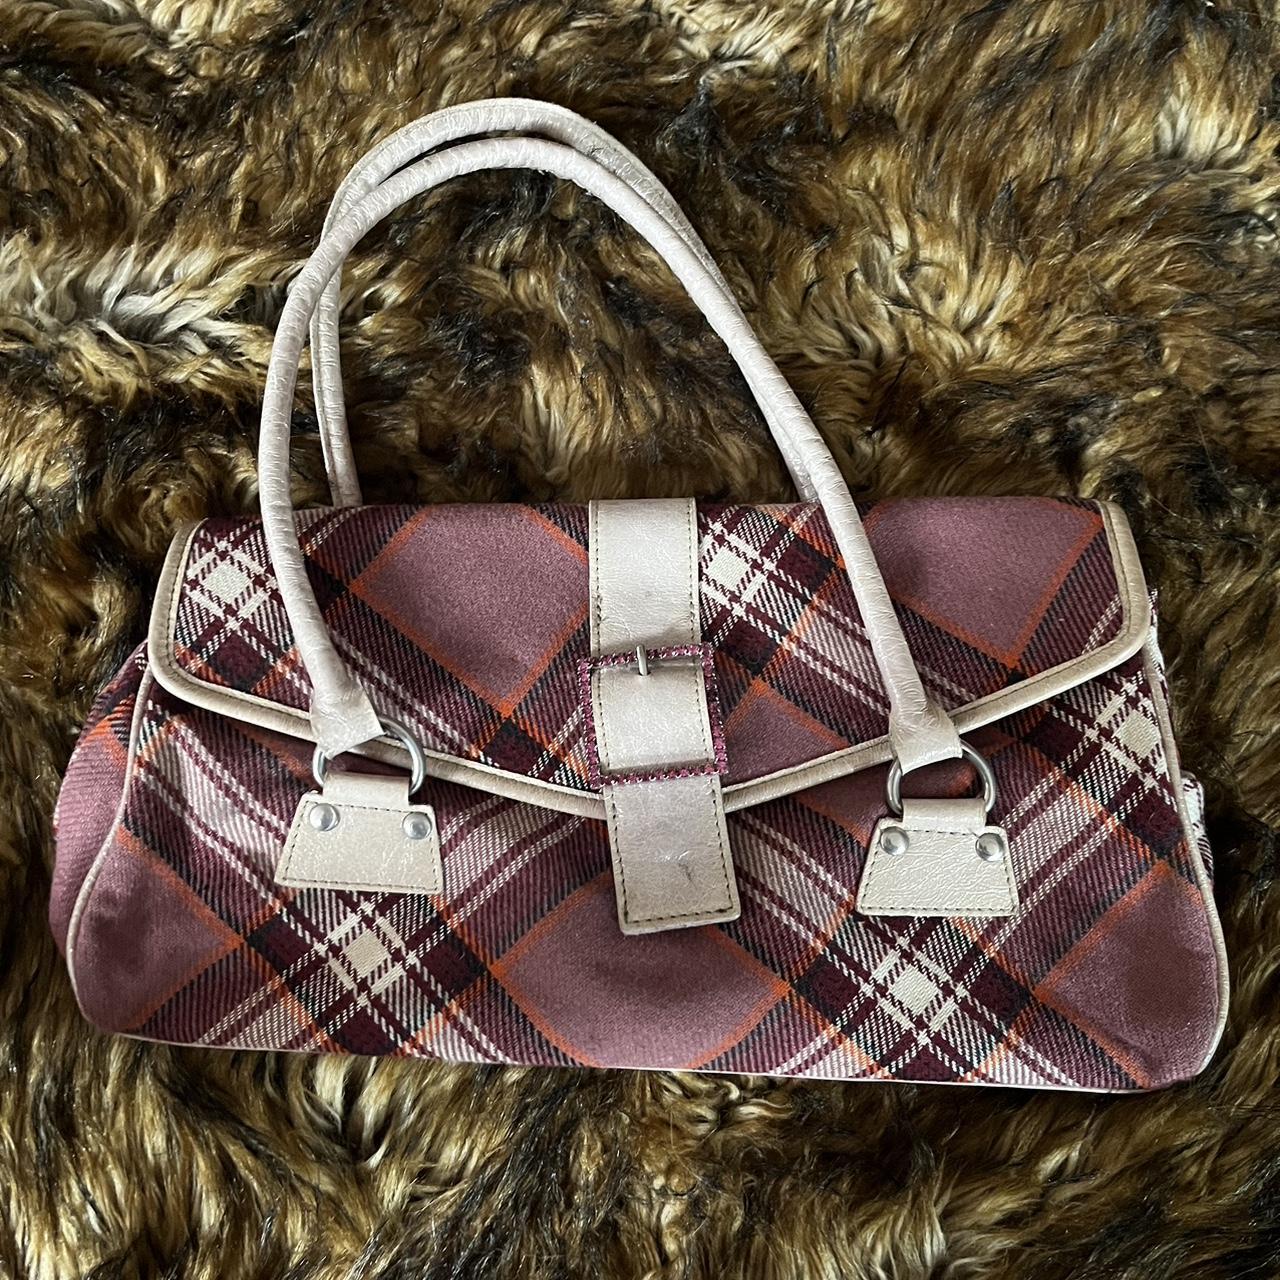 mussio degroot pink plaid purse hard to find - Depop